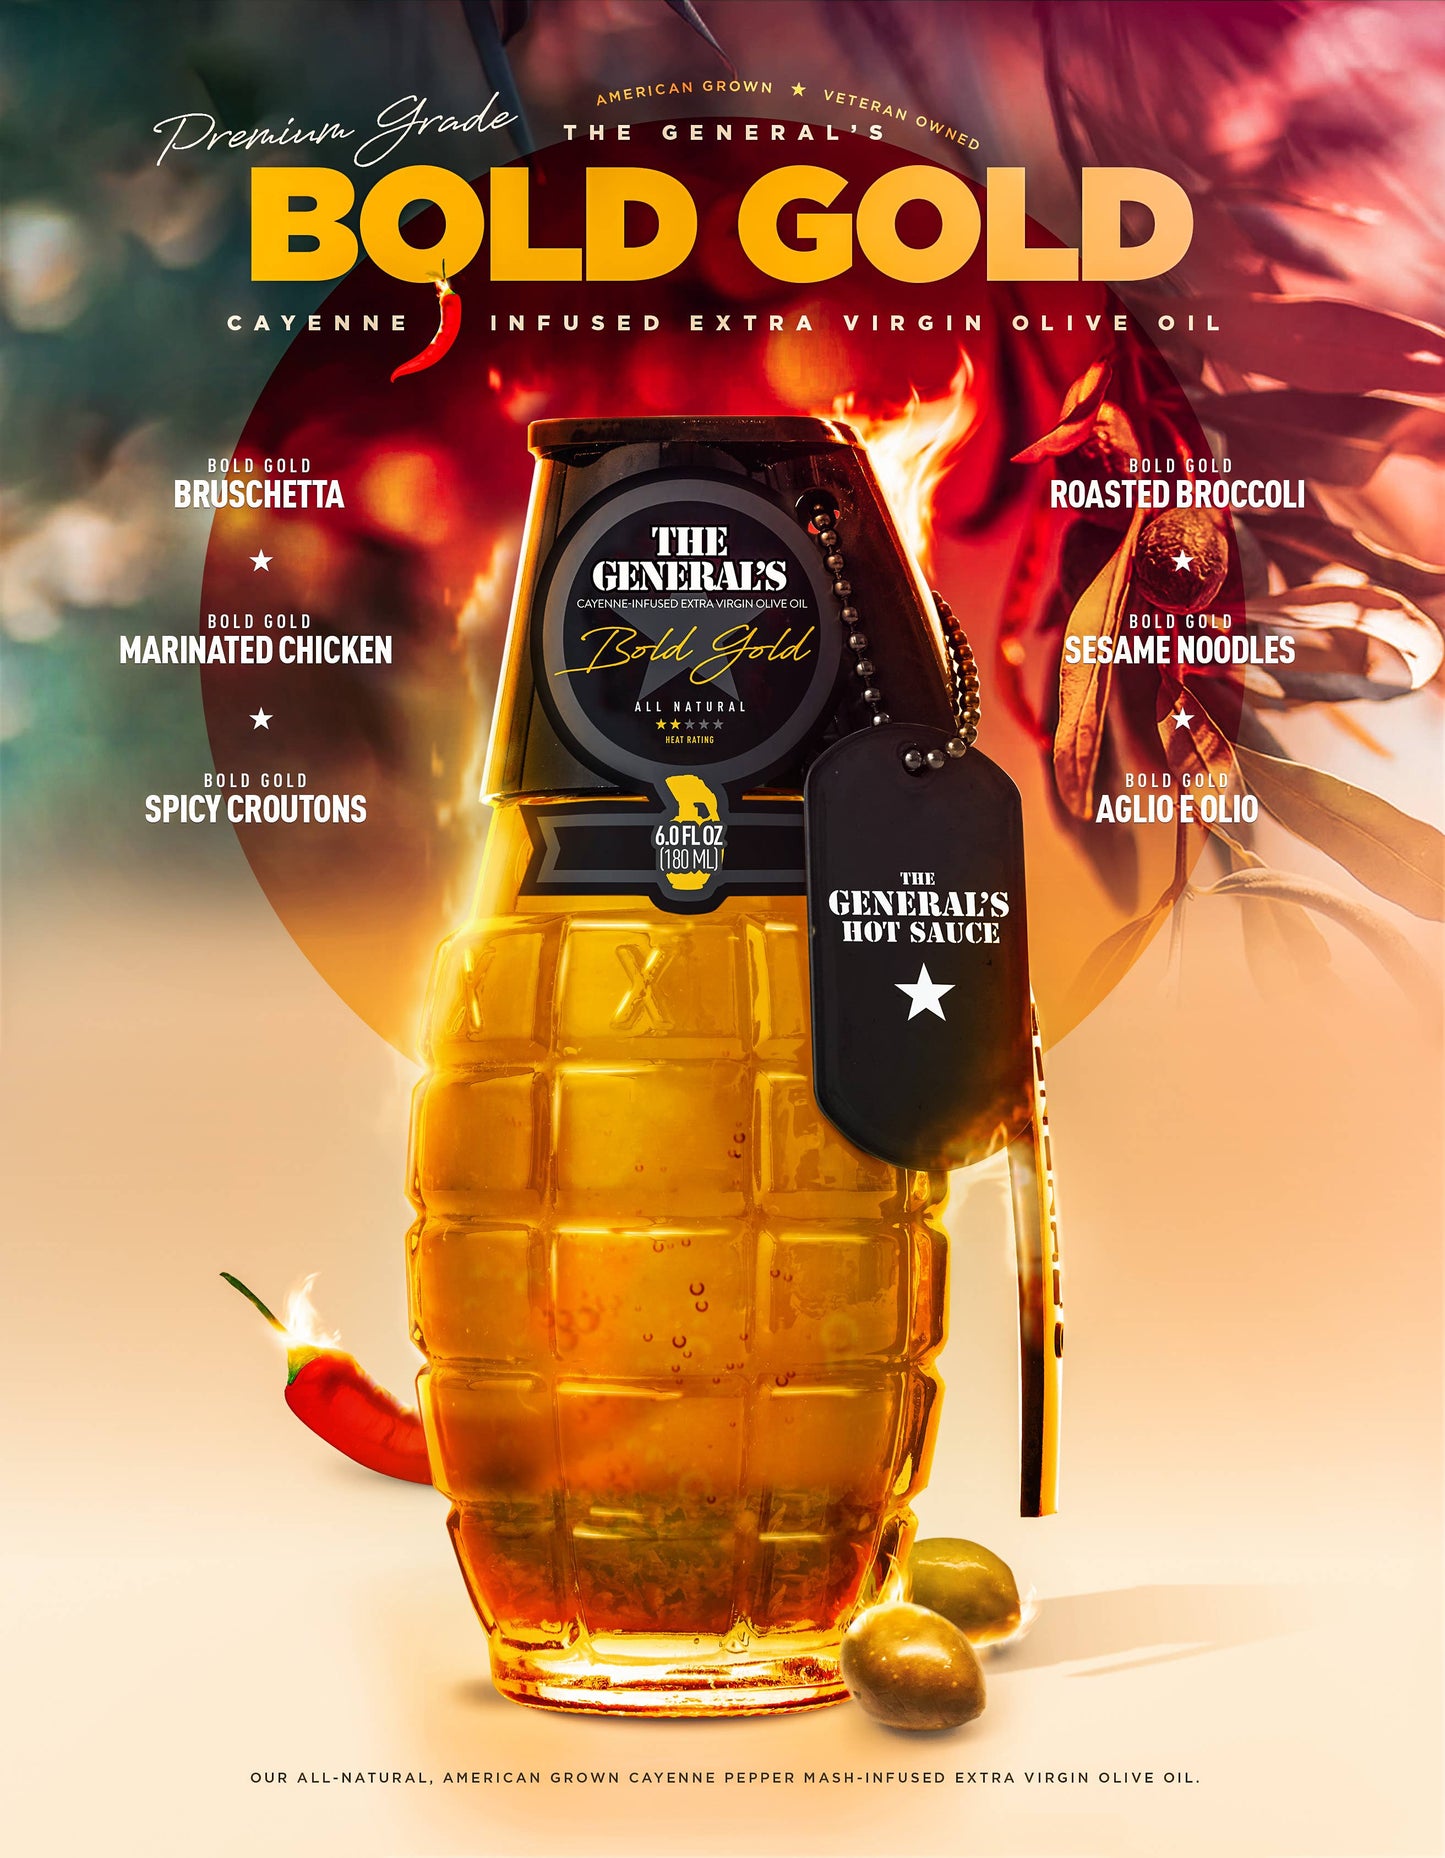 Bold Gold - The General's Hot Sauce